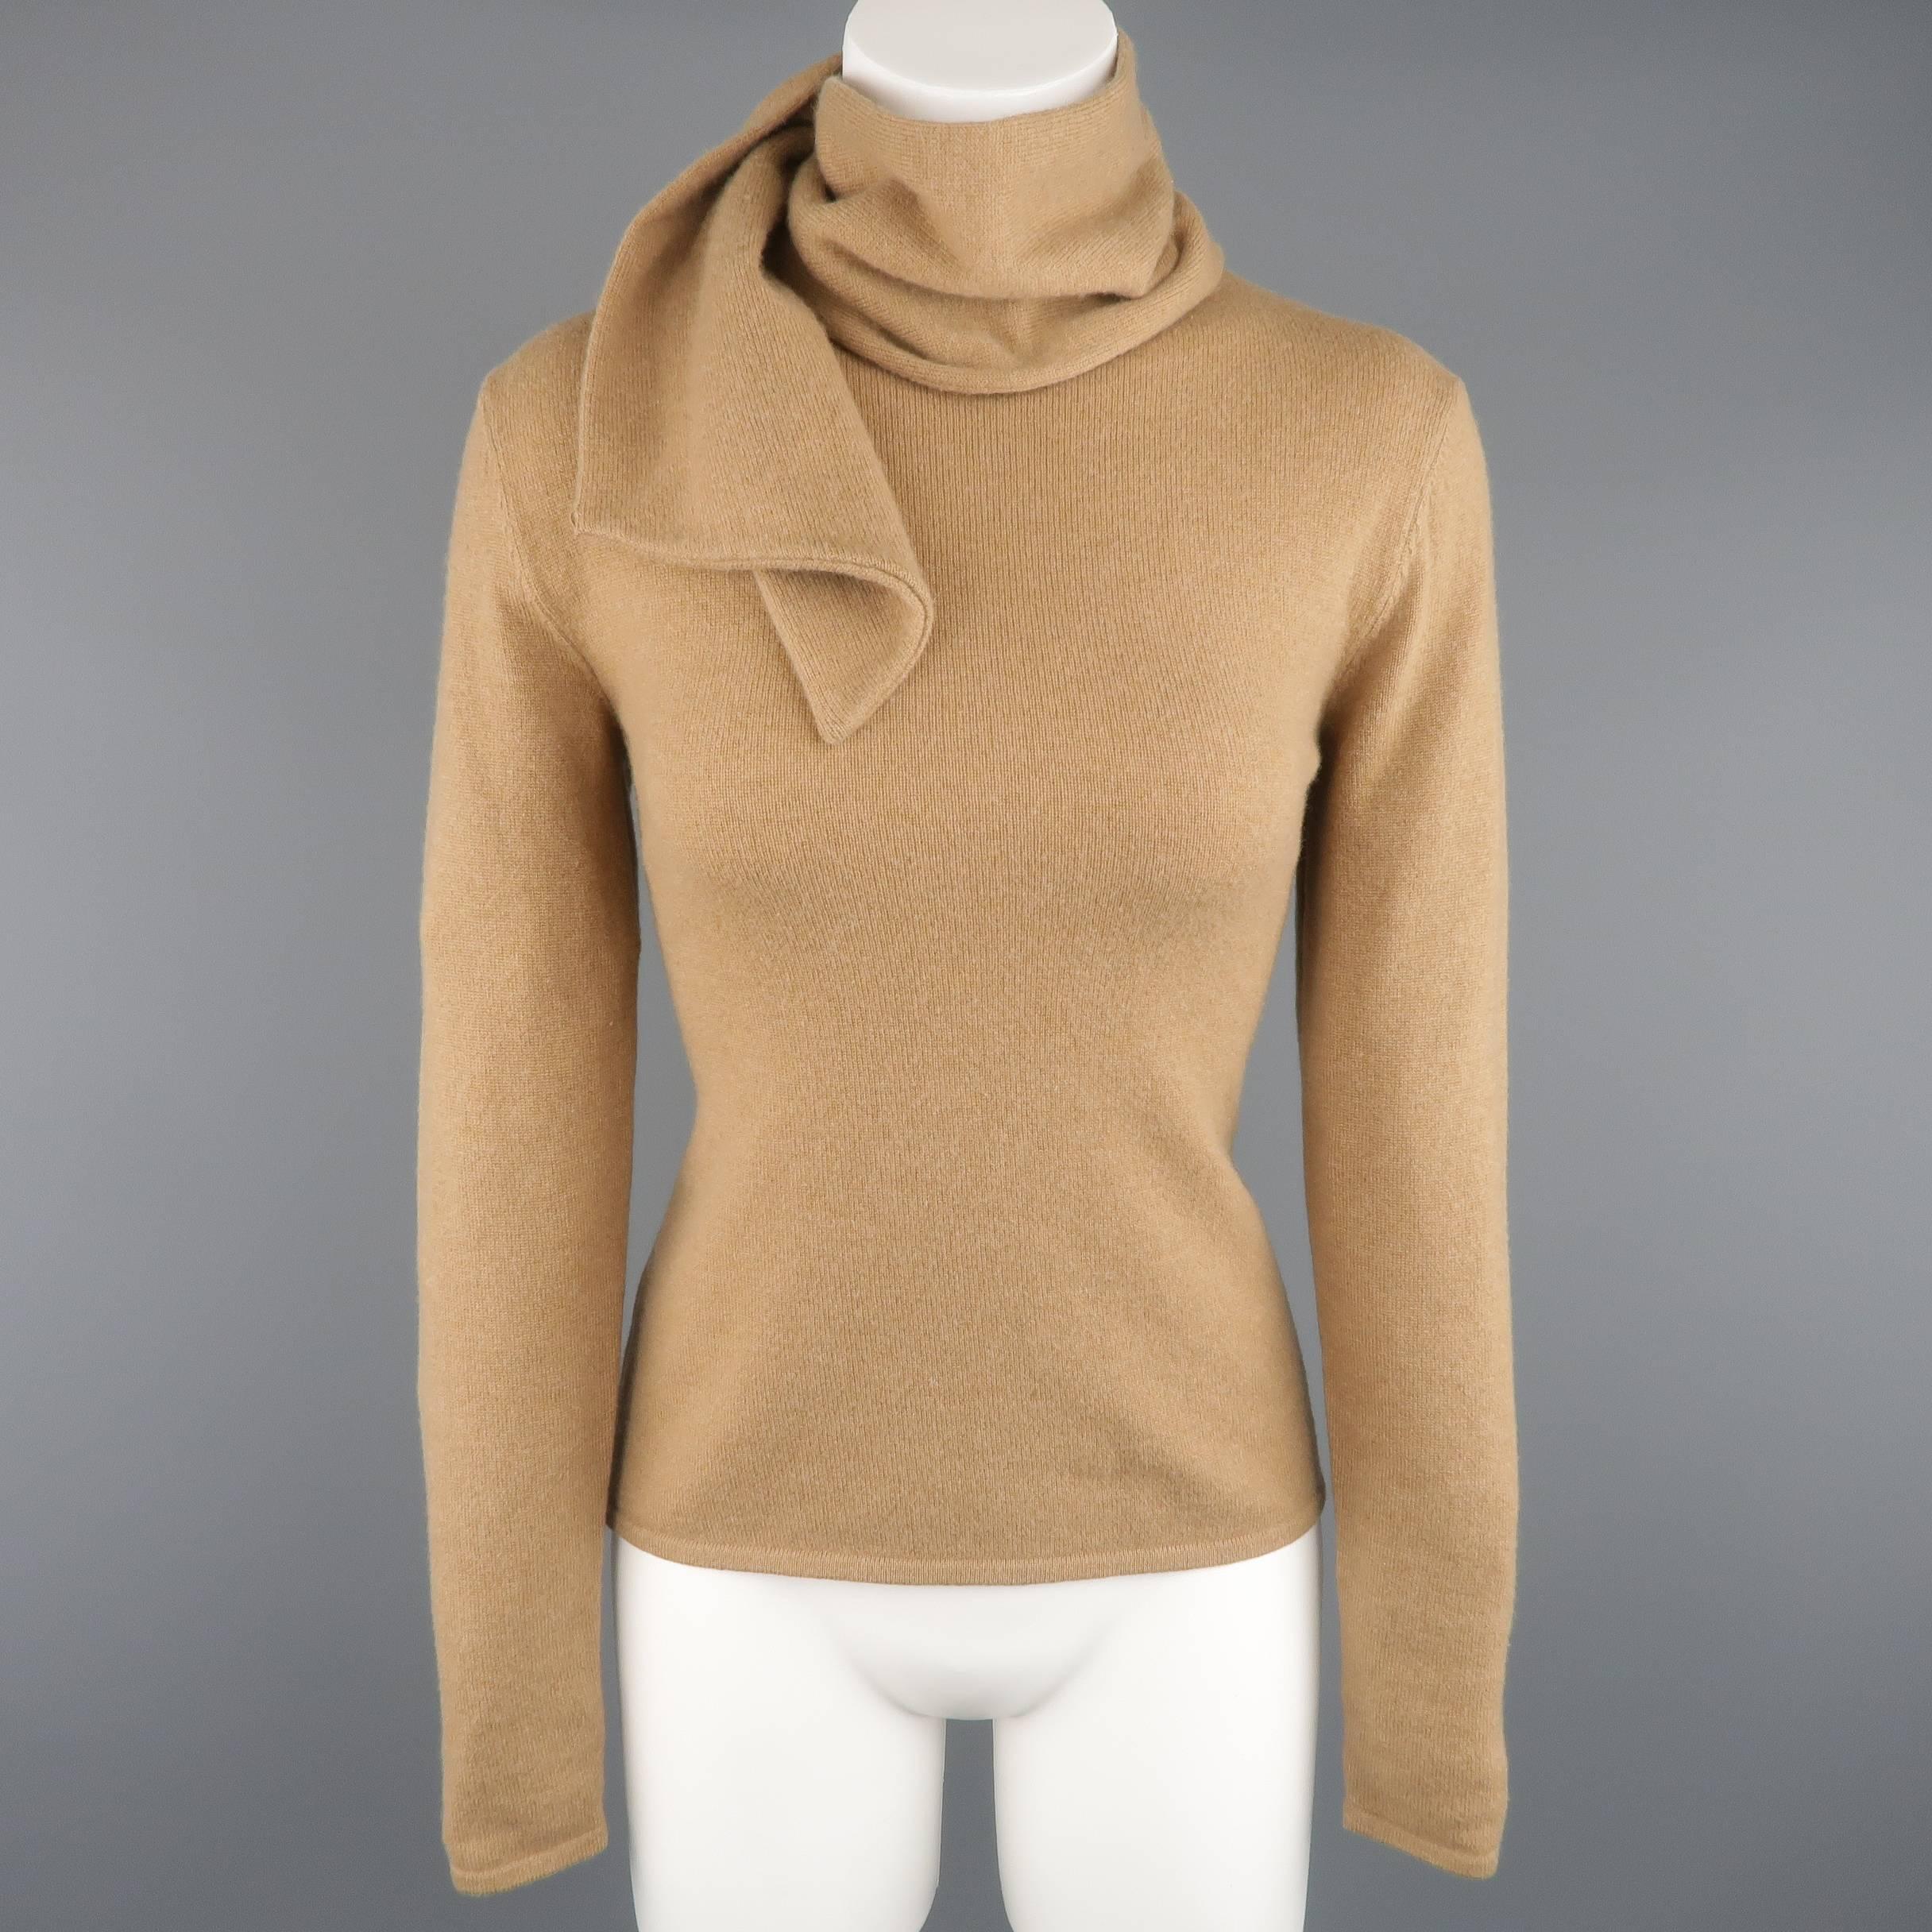 Women's RALPH LAUREN Collection Size M Camel Cashmere Scarf Neck Pullover Sweater